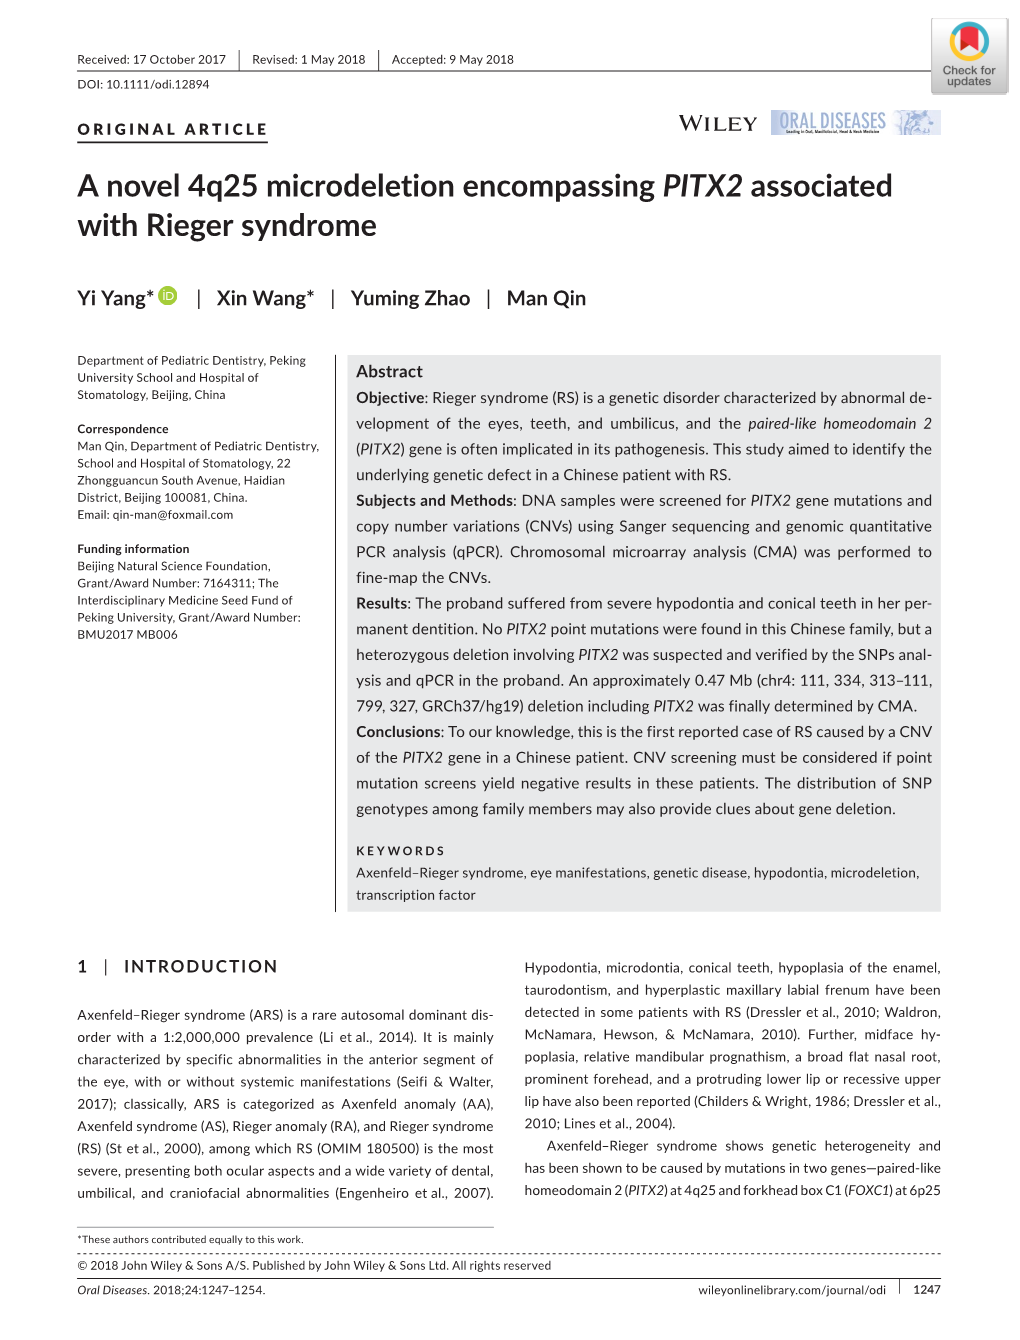 A Novel 4Q25 Microdeletion Encompassing PITX2 Associated with Rieger Syndrome